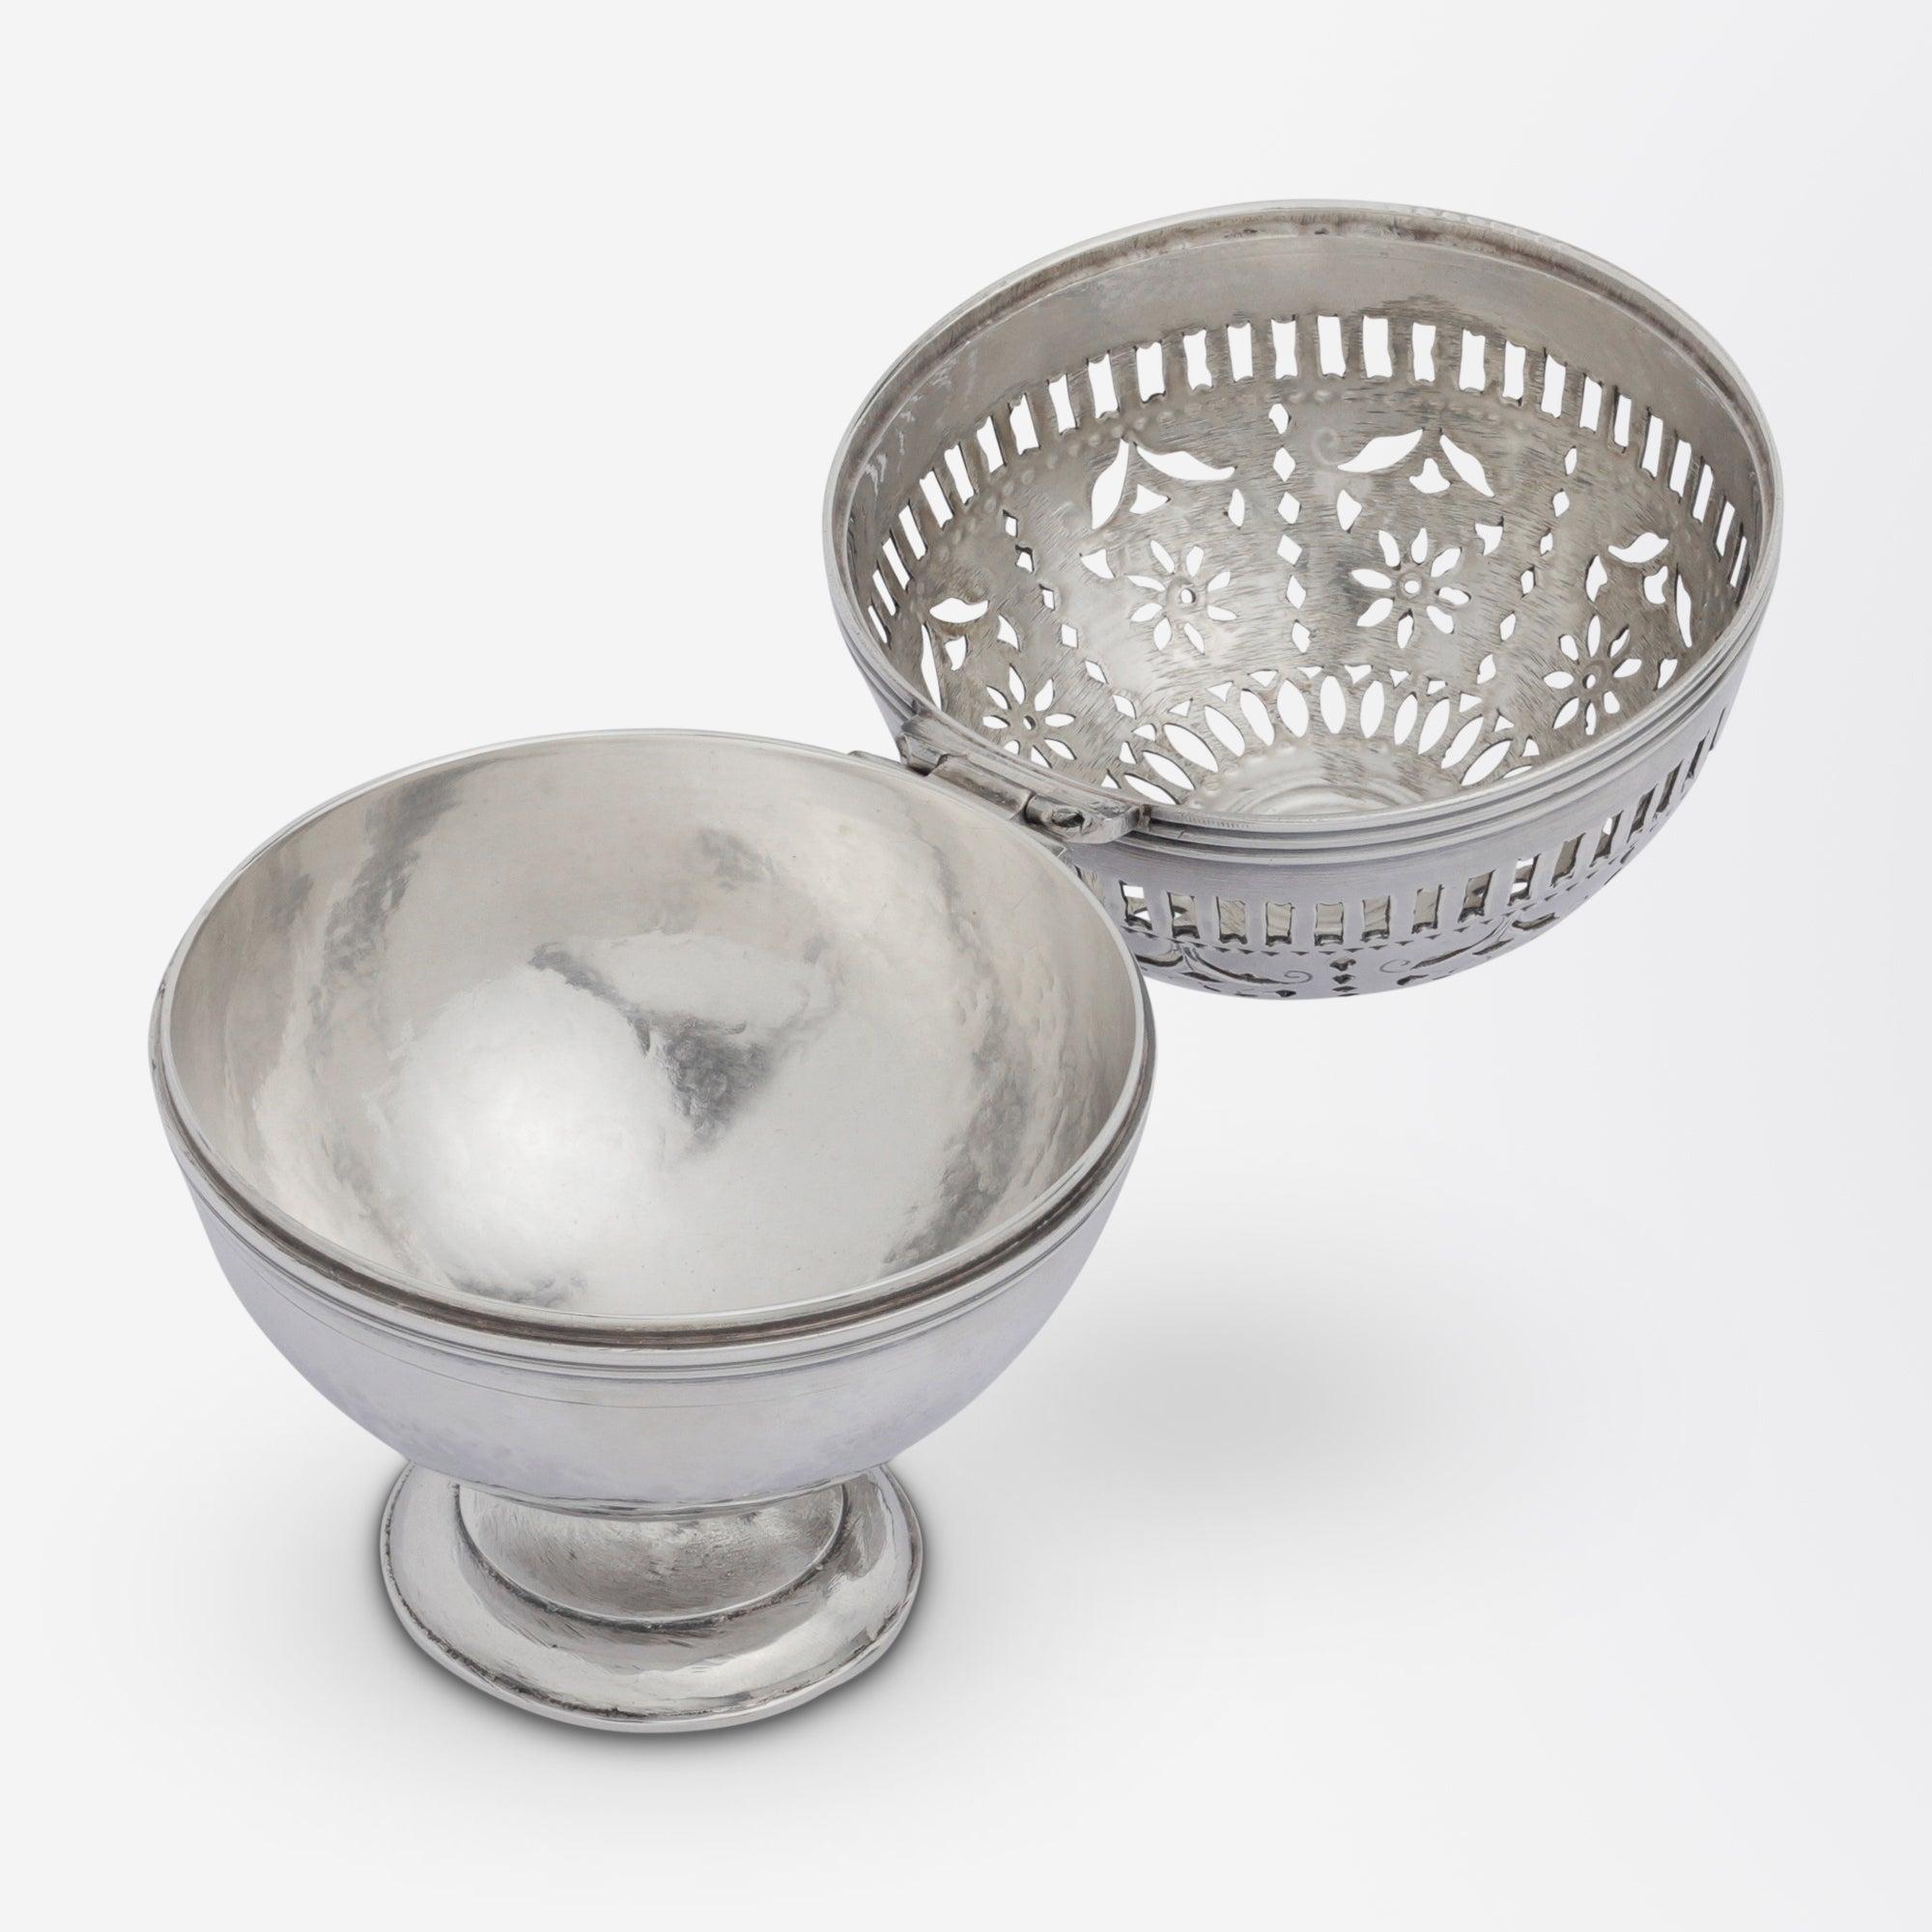 An extremely fine and rare shaving 'sponge box' in silver from the early 19th Century. The footed spherical box originates in Cordoba in Spain and was crafted by Diego de la Vega. The box is signed to the underside 'VEGA 18' along with the rampant